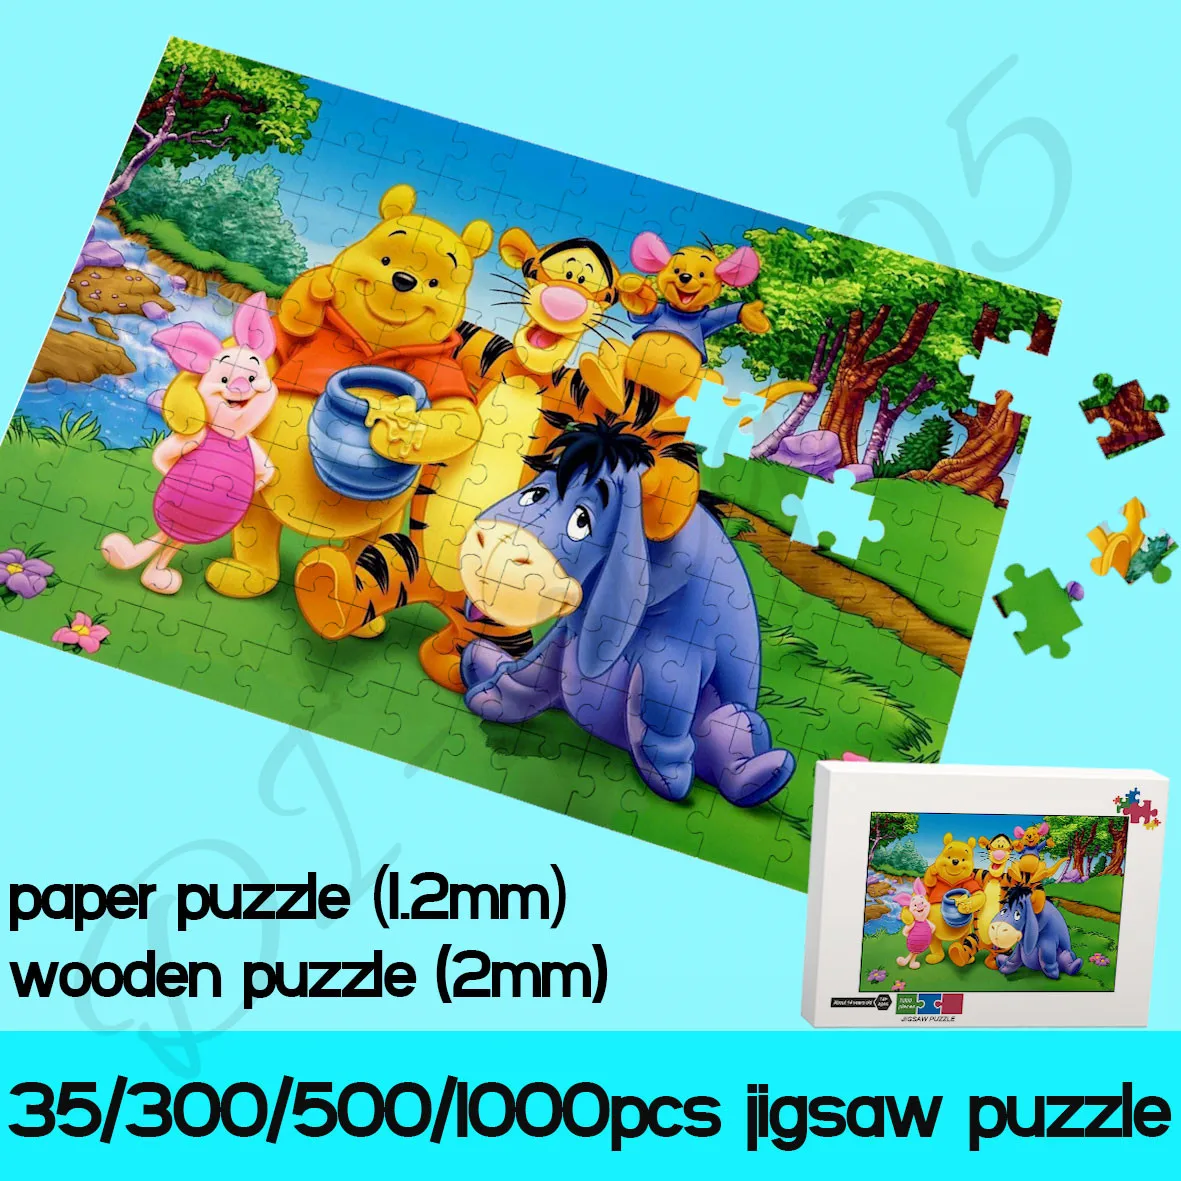 35/300/500/1000 Piece Paper and Wooden Puzzles Disney Cartoon Characters Picture Jigsaw Puzzles Decompress Educational Toys bristlegrass wooden jigsaw puzzles 500 1000 pieces bean flower bird giuseppe castiglione educational toy chinese paintings decor